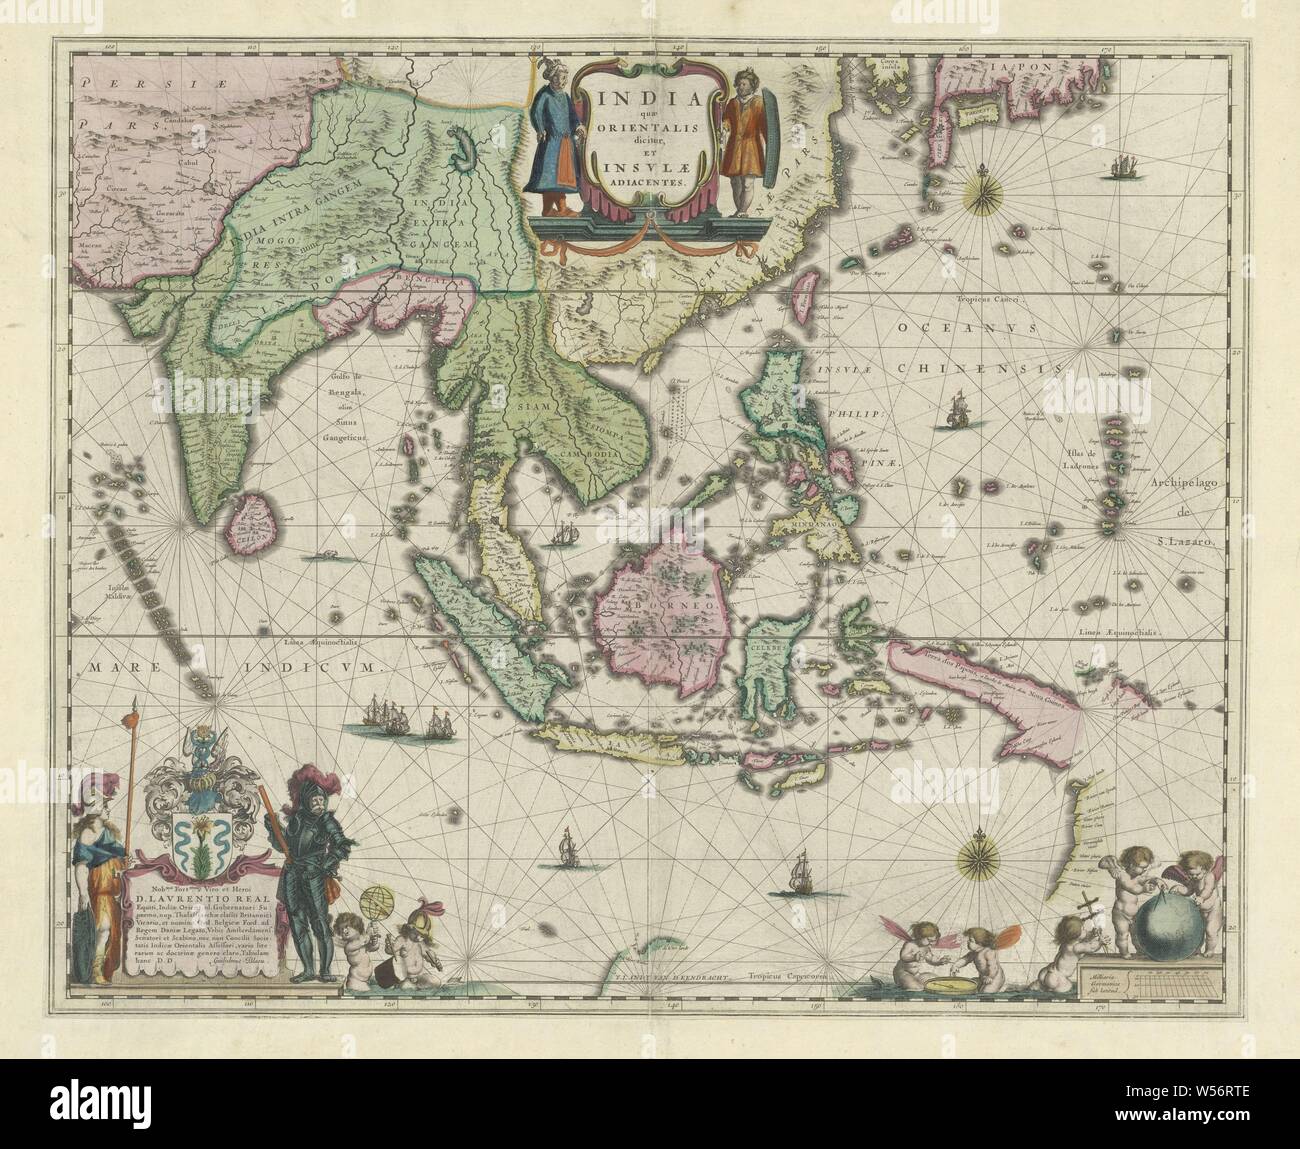 Map of Indonesia and part of Southeast Asia, India with Orientalis dicitur et Insulae adiacentes (title on object), Map of Indonesia and a part of Southeast Asia. The different areas are colored differently. In the top center on either side of the title cartouche standing men in 'Asian' costume. Below left the assignment to Laurens Real surrounded by coat of arms, Minerva, knight in armor and putti. Bottom right scale in German miles surrounded by putti with cartogriafic instruments. Ships in the sea here and there. On the right two compass roses, maps of separate countries or regions Stock Photo